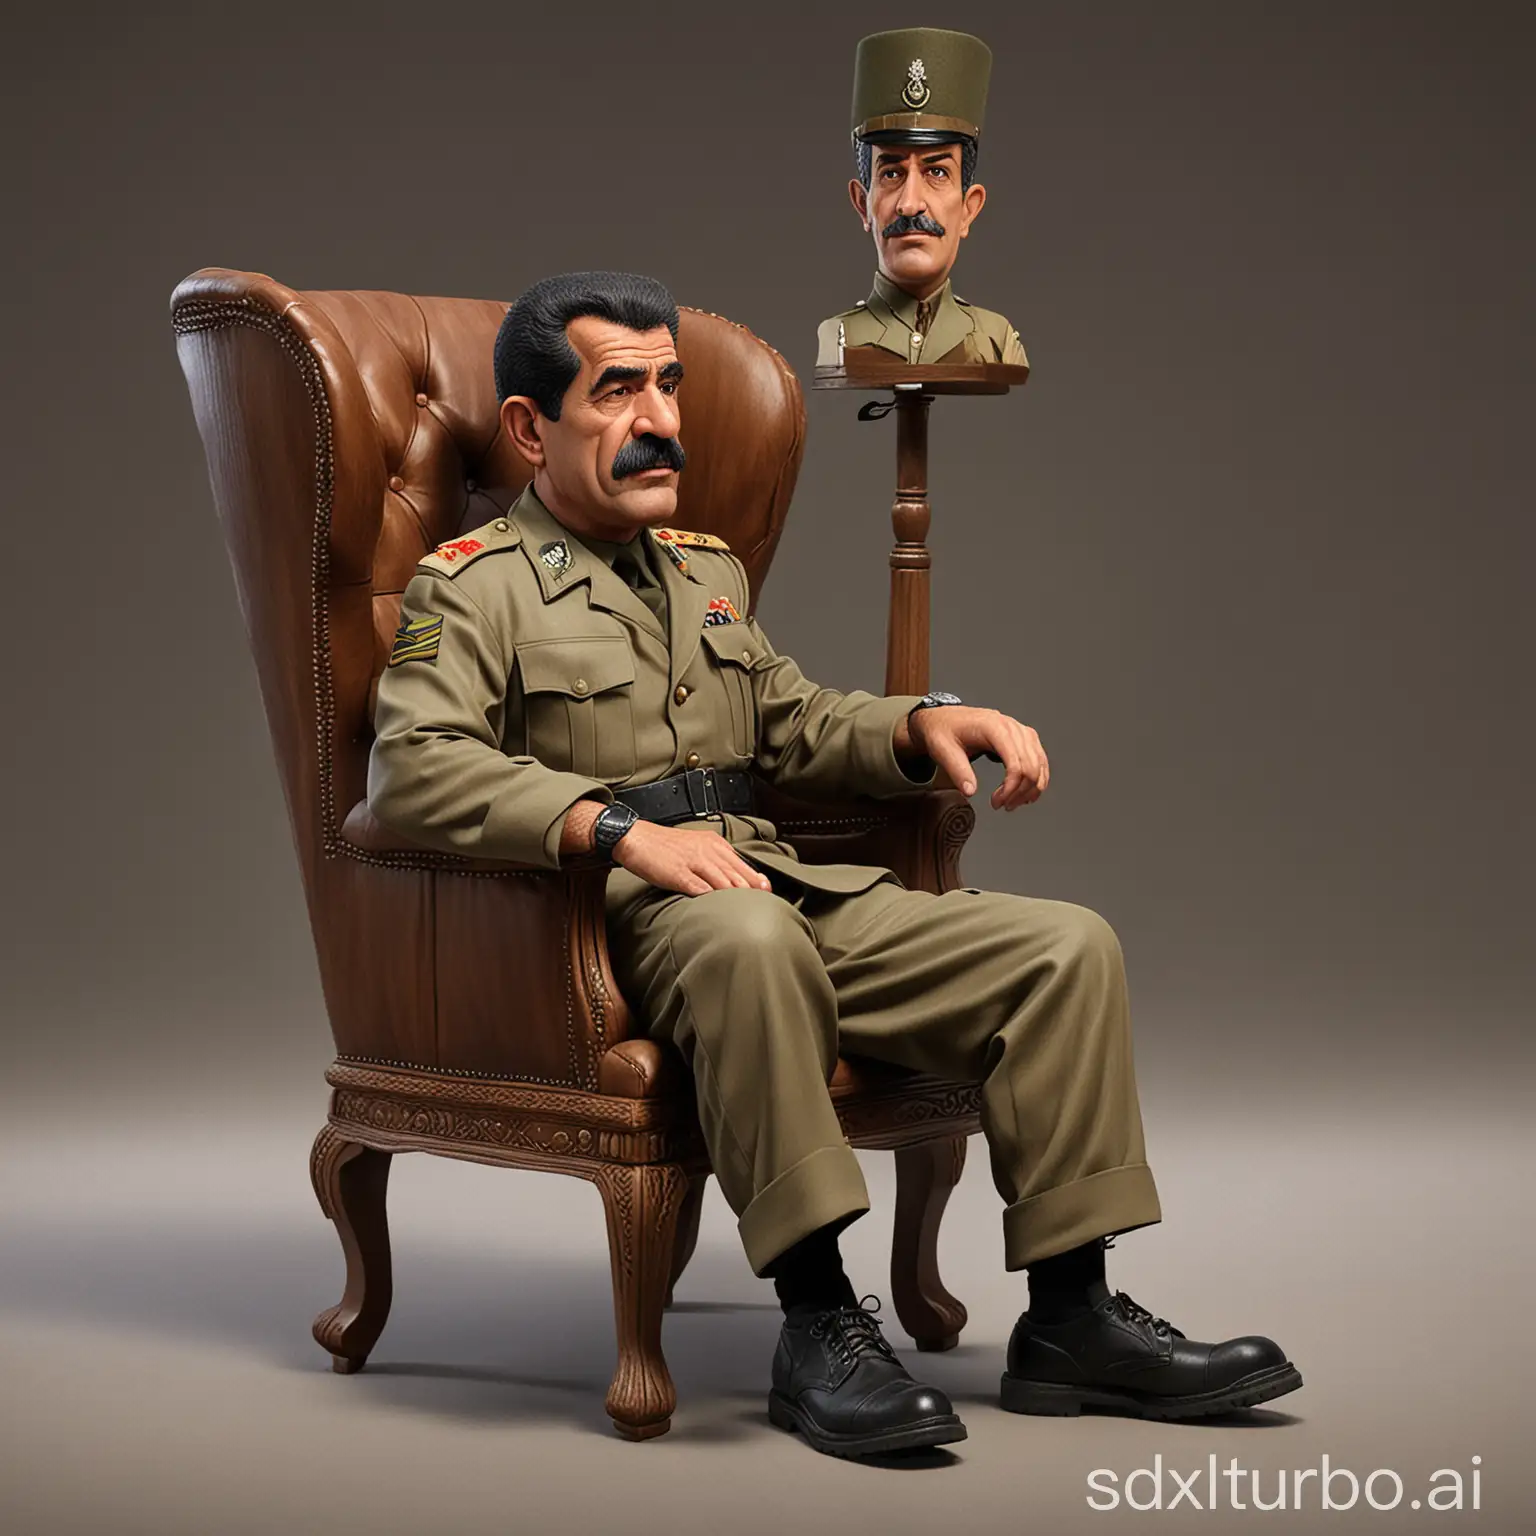  Create a Caricature 3D Realistic Cartoon style full body with a big head, "Saddam Hussein". A 60-year-old Arab man, is sitting relaxed in a classic brown wooden wingback chair, the texture of the wood is clearly visible. Wearing an Iraqi military uniform. Wearing black army shoes. Sitting with his legs crossed, his right hand holding a short wooden stick, the left hand holding the ceasefire. The background should contrast with the color of the chair and clothing, thereby enhancing the overall image composition. Use soft photographic lighting, Lighting from above, dramatic overhead lighting, very high image quality, clear character details, UHD, 16k.